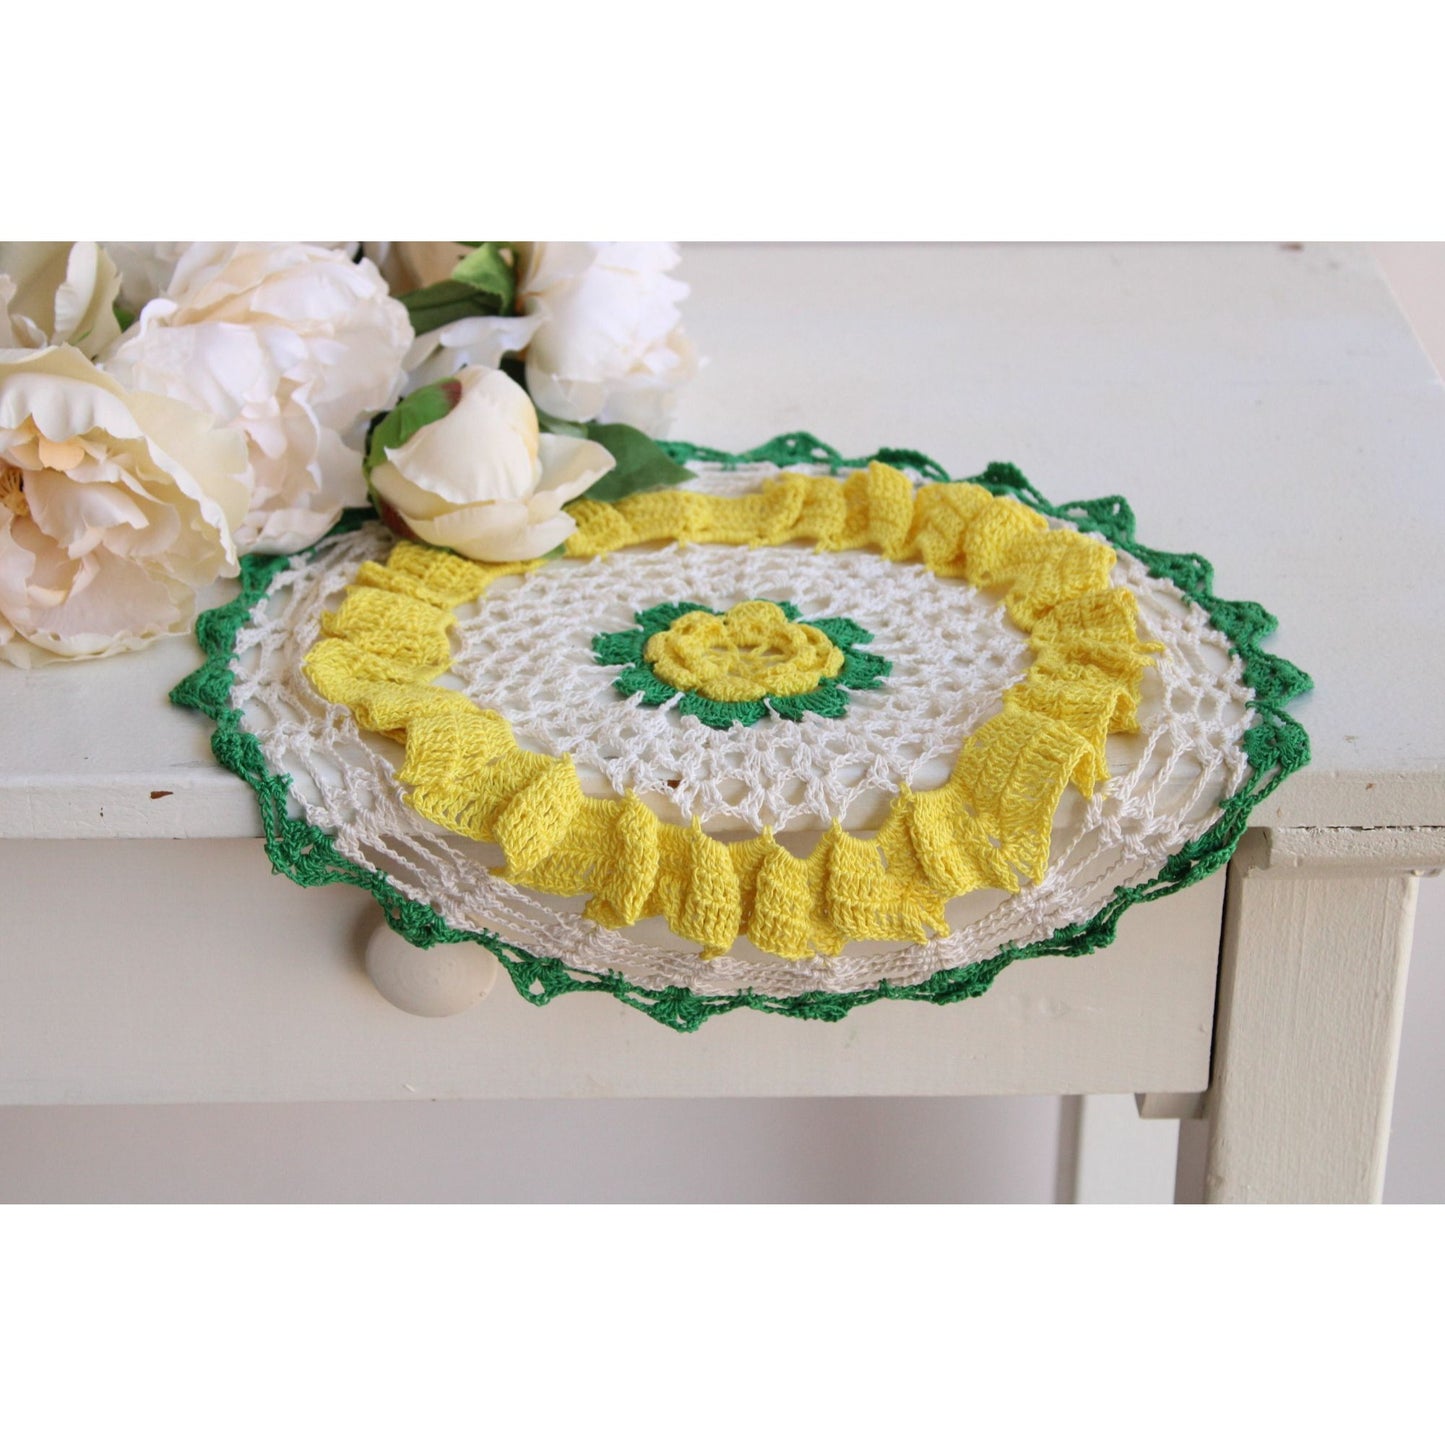 Vintage 1960s Crochet Doily in Yellow, Green and White